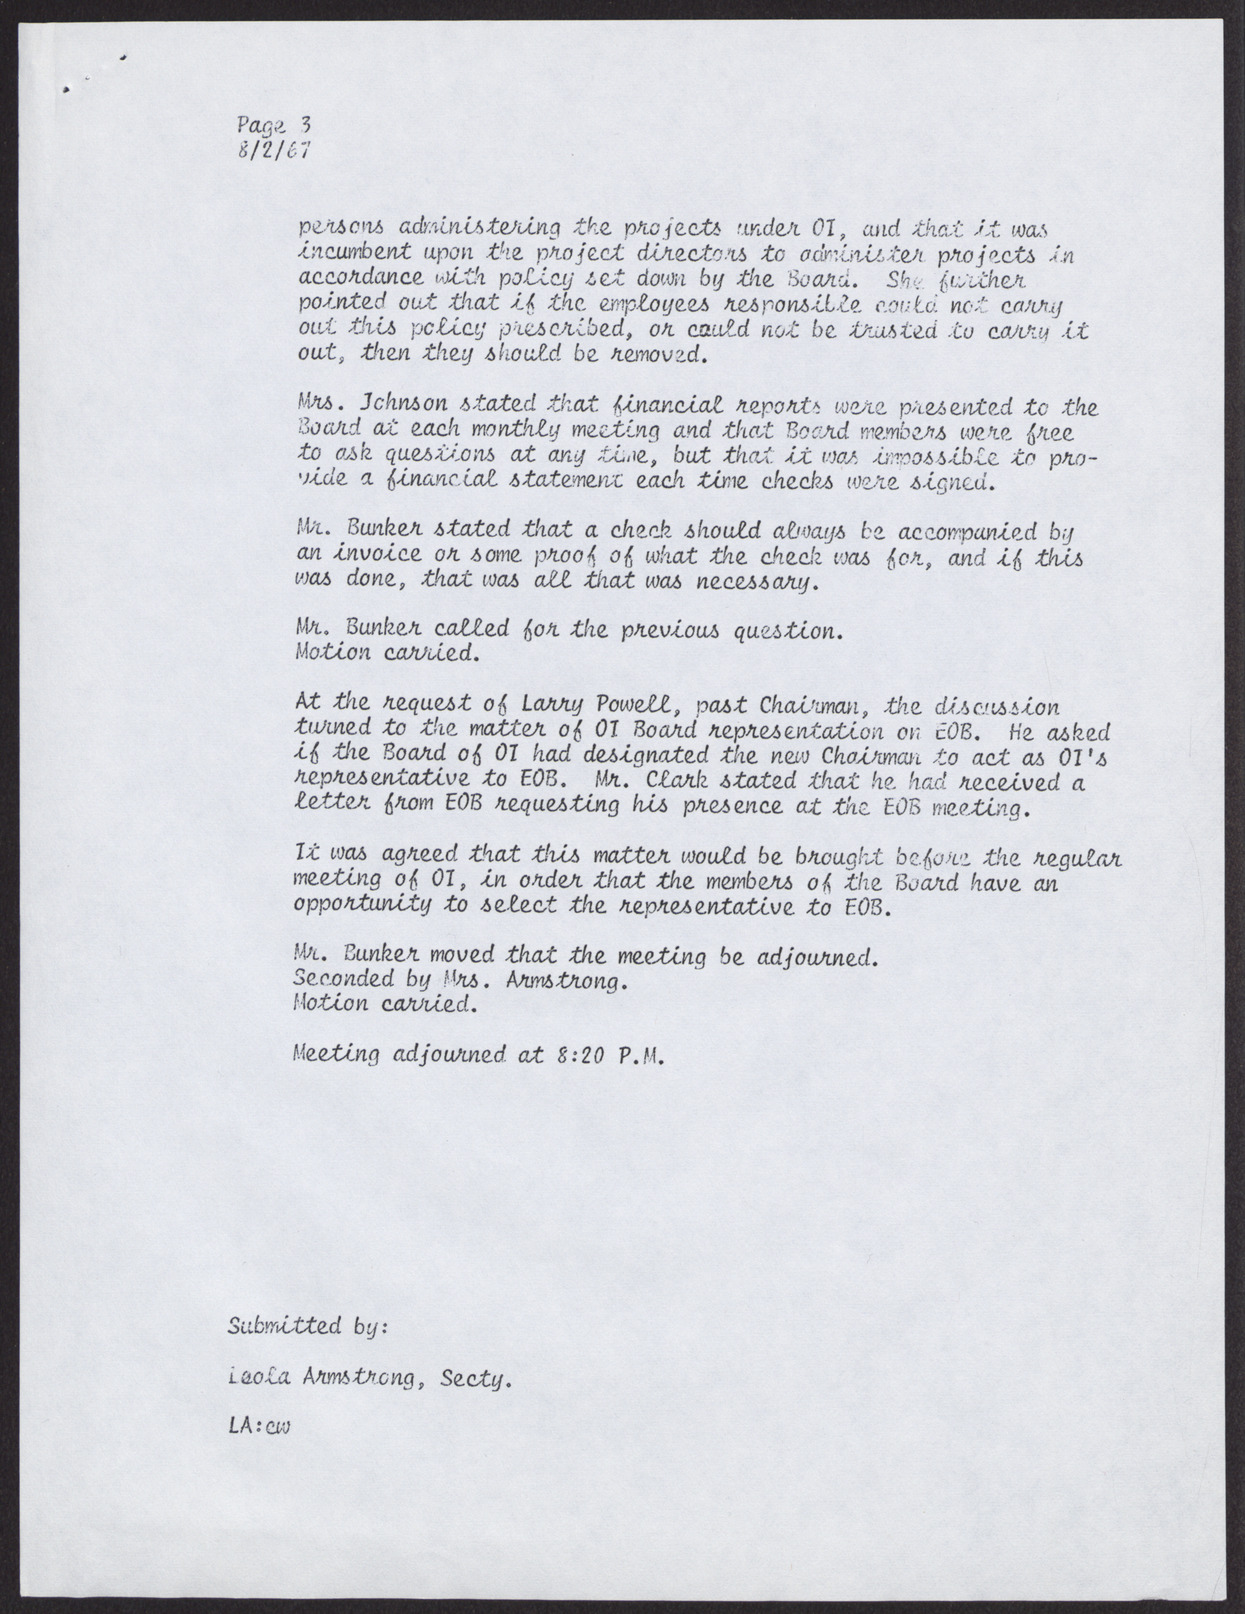 Minutes from Operation Independence meeting (3 pages), August 2, 1967, page 3